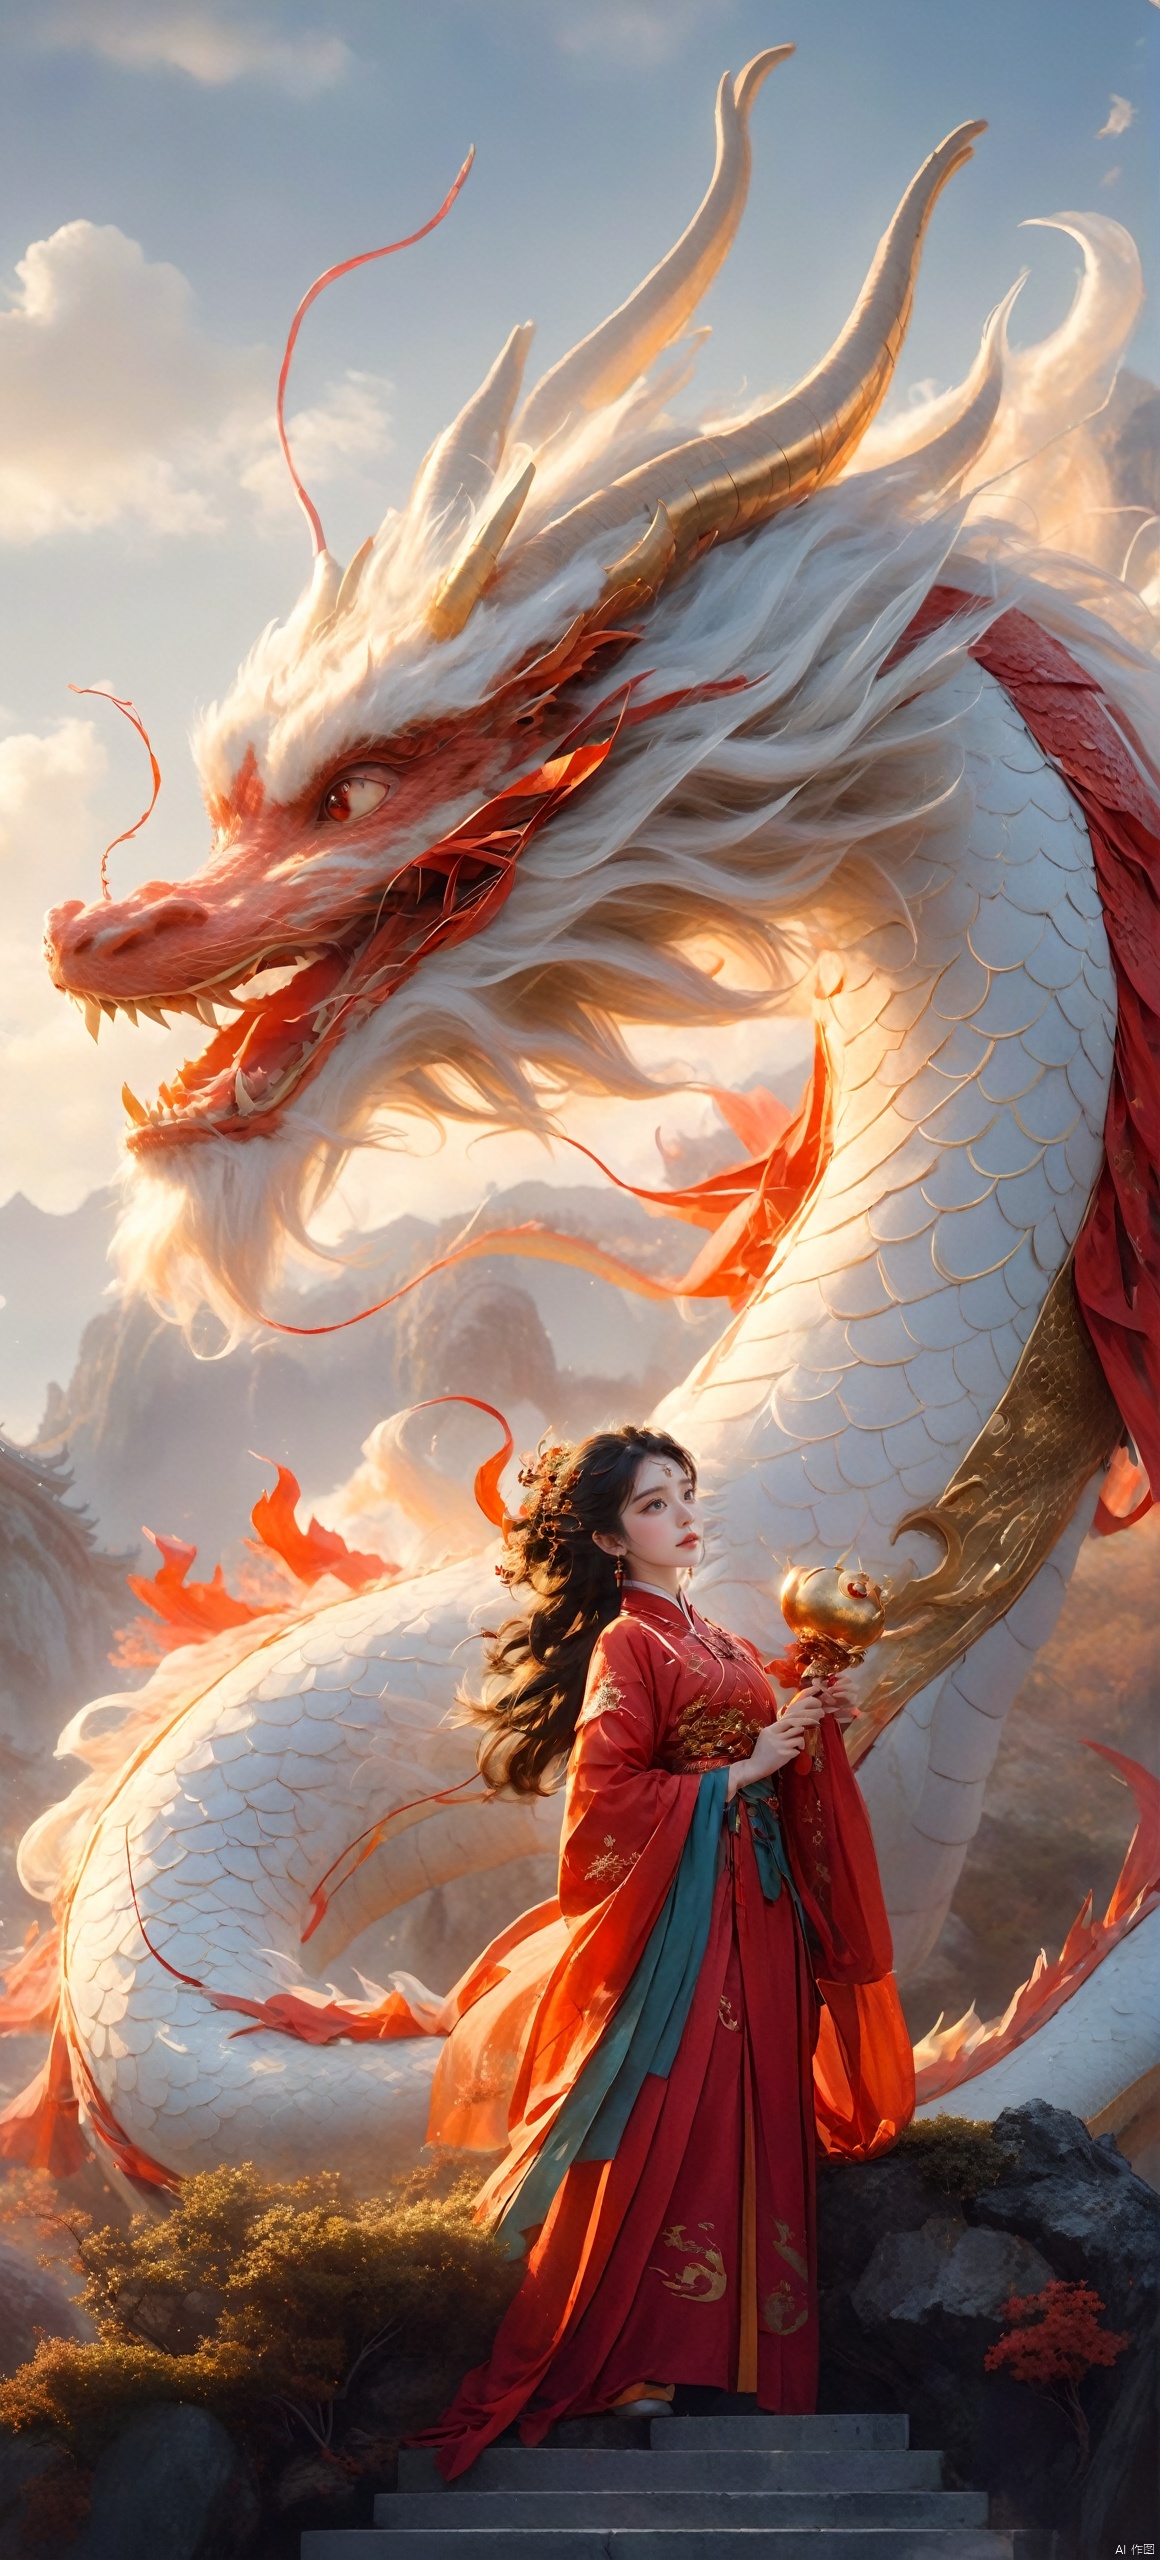  The girl and the Chinese dragon,Chinese dragon,1girl,Dragon Claw,Chinese Hanfu,cloud,squama ,The hair on the faucet,Ultimate details,Dragon horn,The graceful and winding dragon body,cloudy sky,dragon,dragon horns,eastern dragon,Open the dragon's mouth,The girl stands on the dragon's body, with a back and a metal decorative object behind her,Close range,Red Dragon,evening,gradient sky,The camera looks up from below,horns,long hair,mountain,open mouth,orange eyes,outdoors,scales,sky,smoke,solo,sun,sunset,teeth,twilight, Chinese dragon, glow